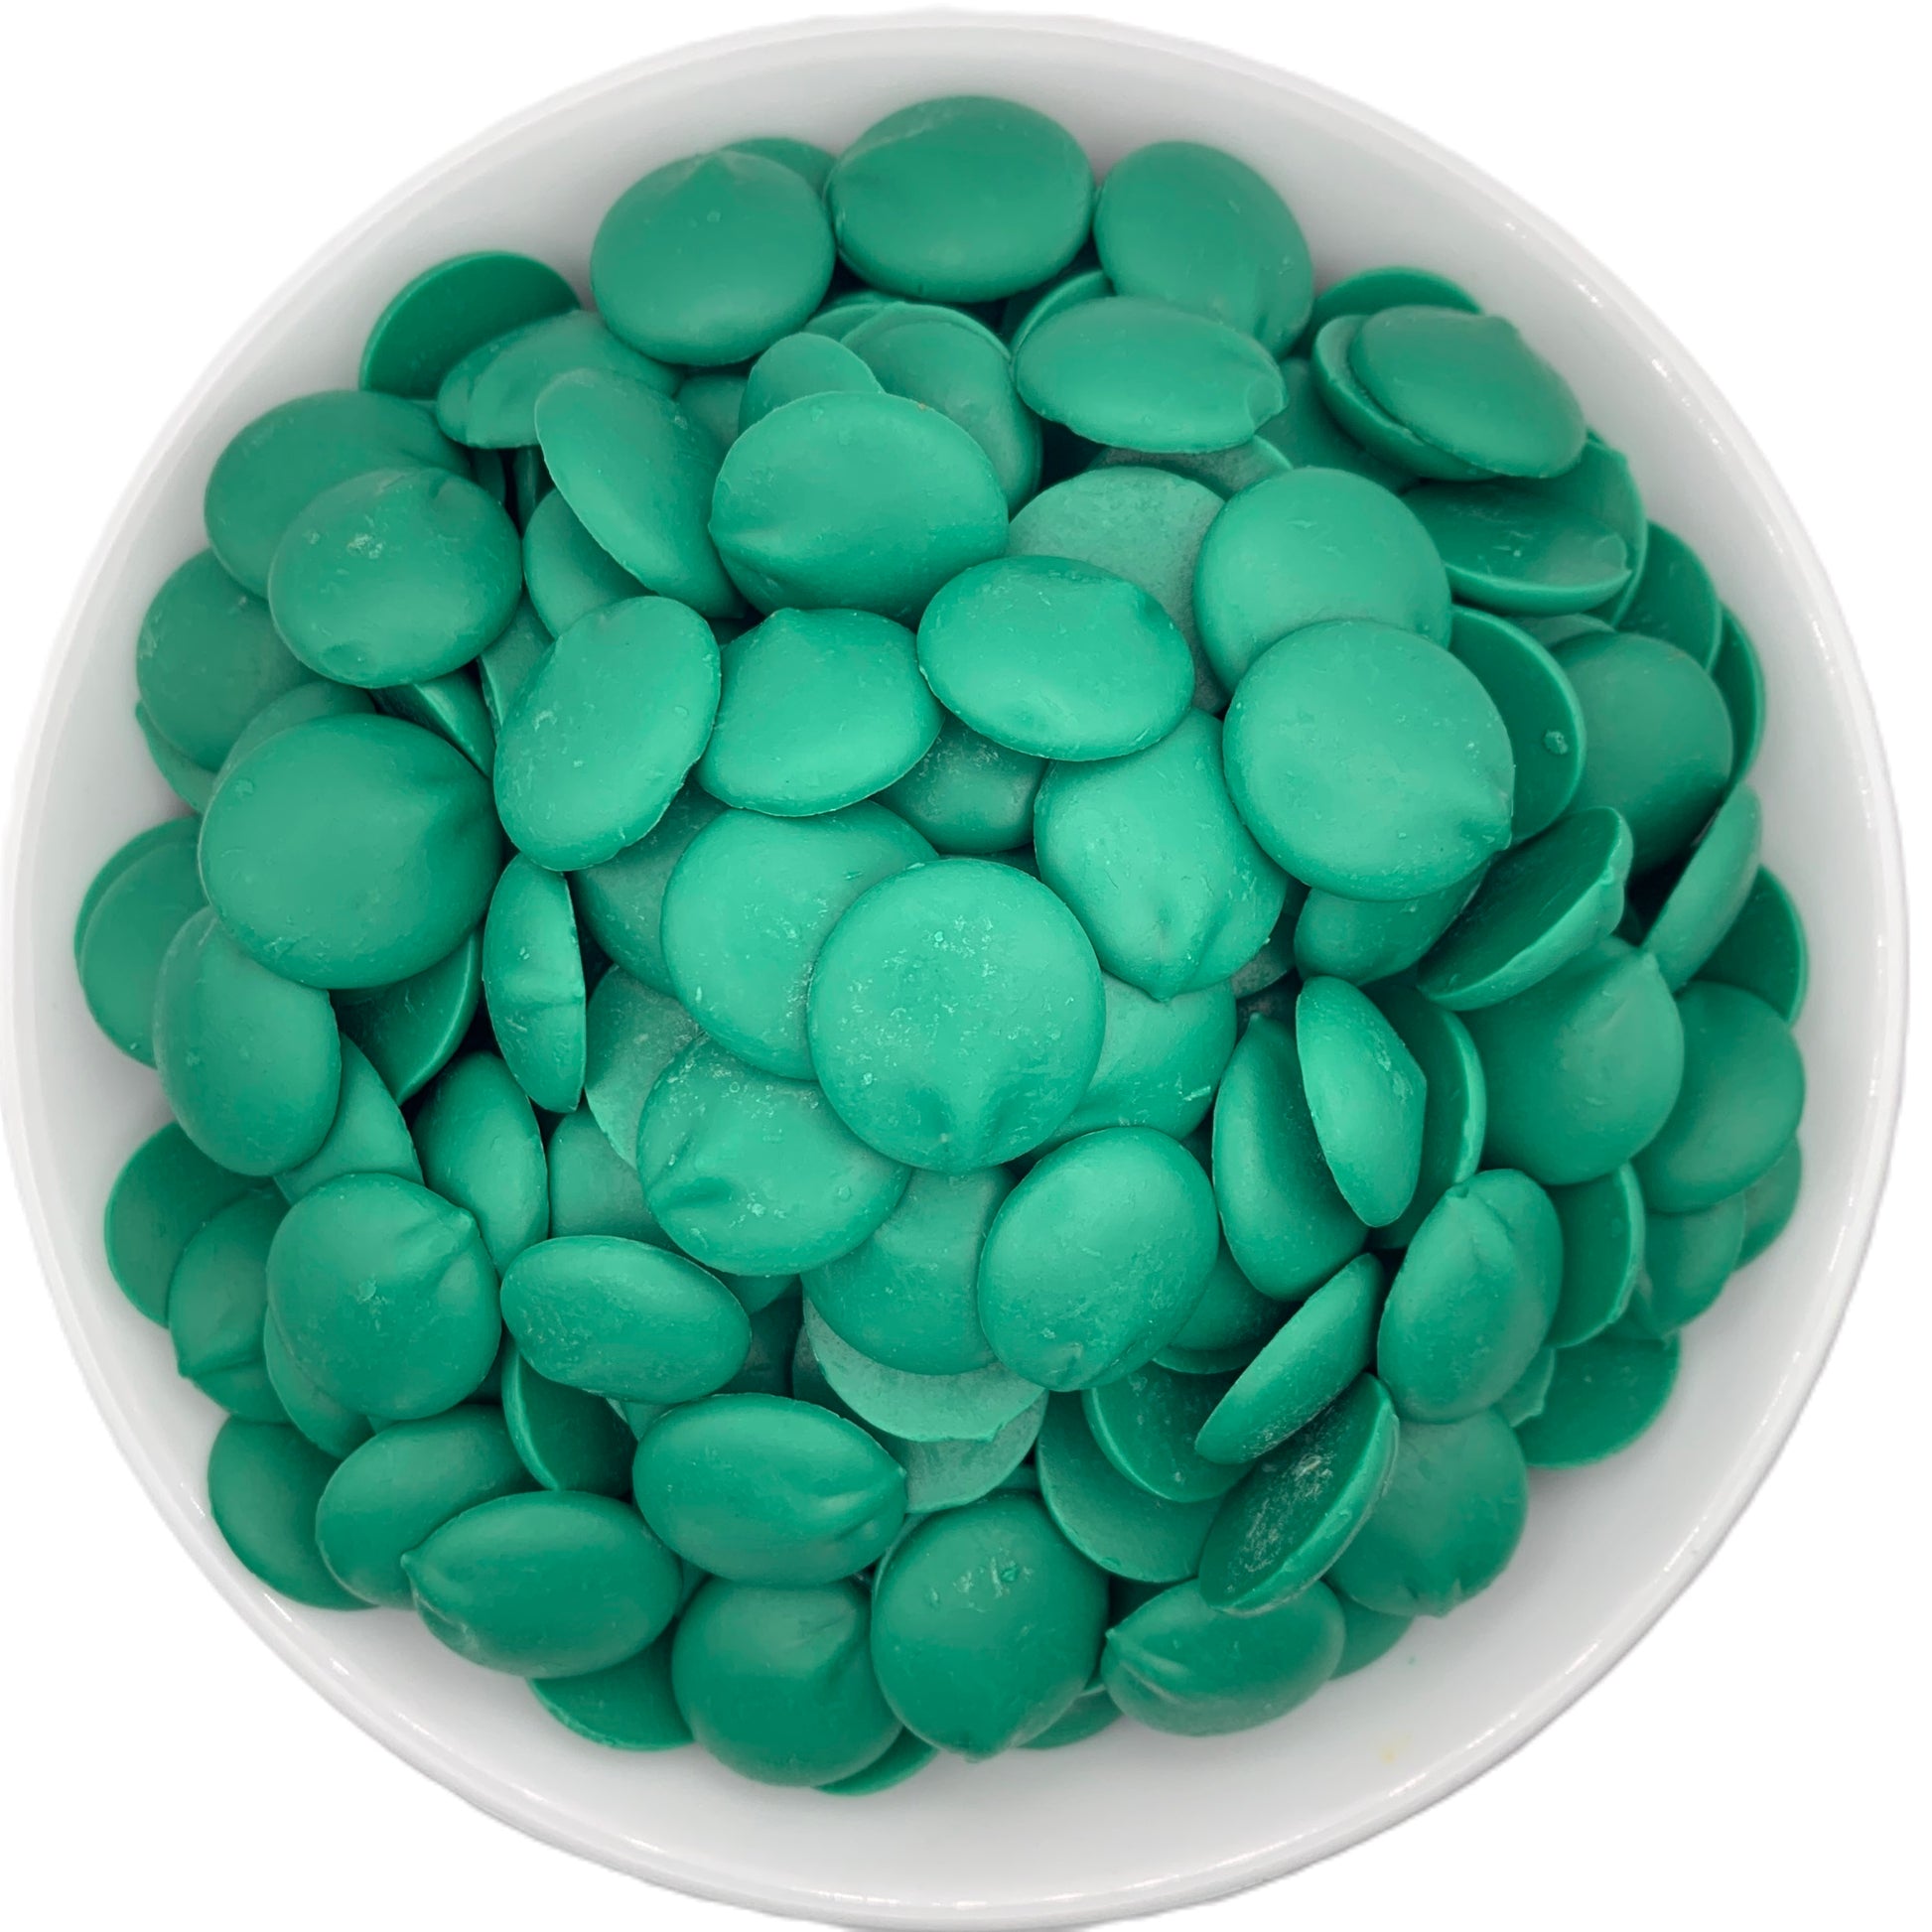 Top view of a white bowl full of Merckens dark green chocolate melting wafers, showcasing the vibrant green color perfect for themed desserts and festive treats.